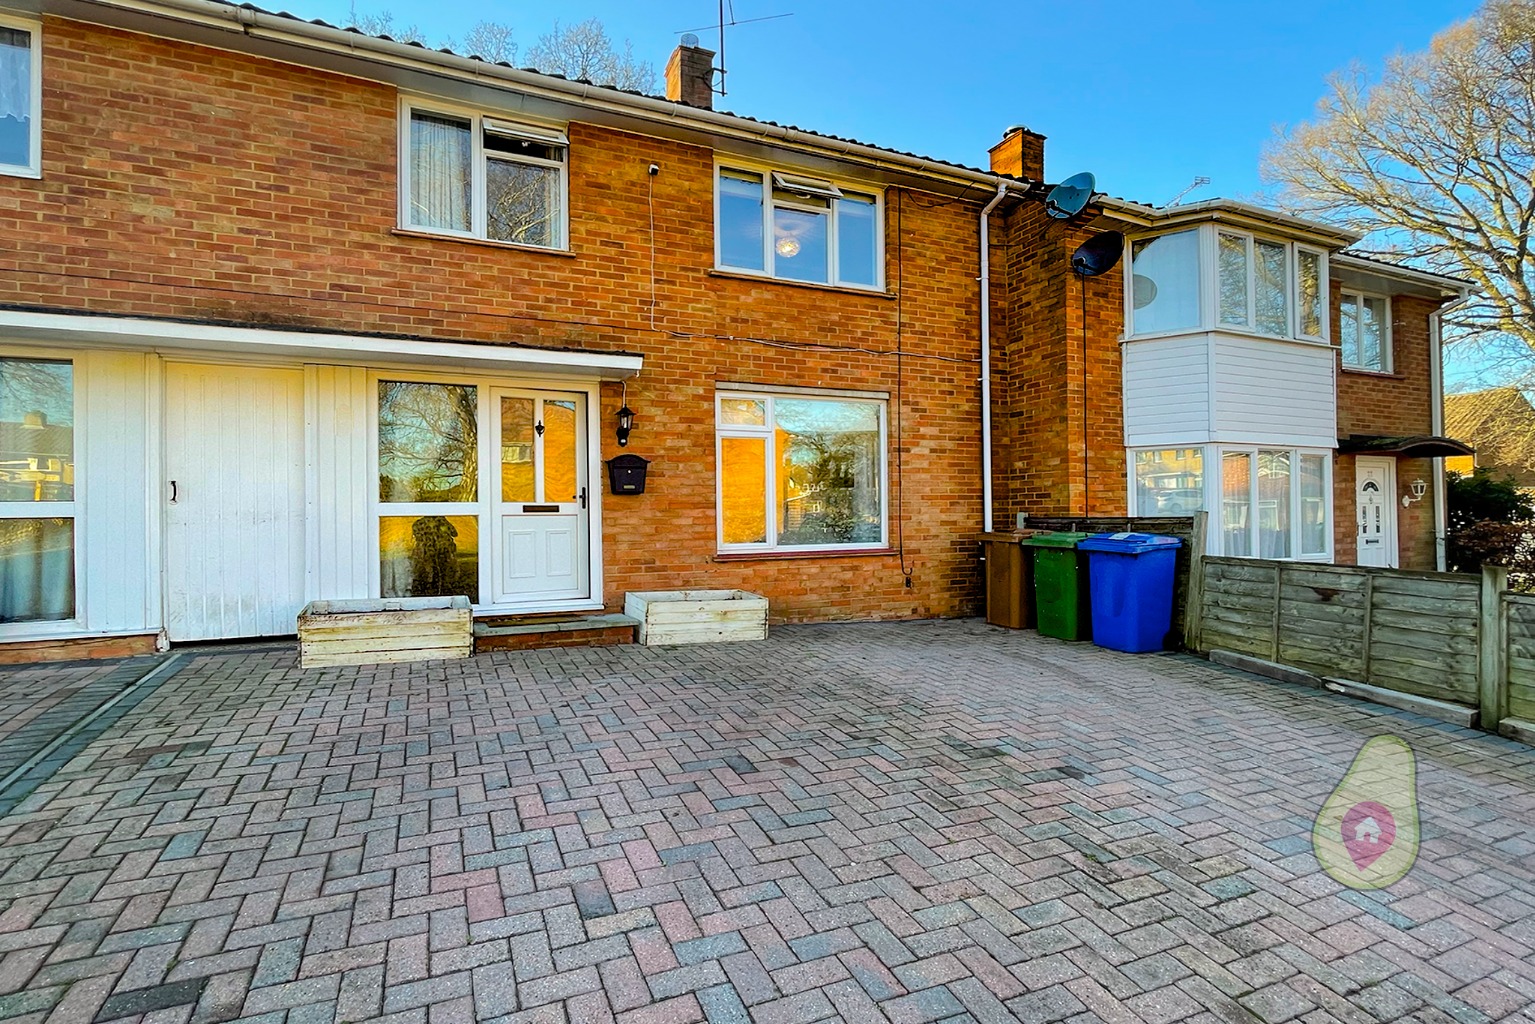 OPEN HOUSE SATURDAY 5th February VIA APPOINTMENT ONLY. beautifully presented three bedroom home with a flexible layout, low maintenance garden & driveway parking for 3 vehicles. There is potential to extend, subject to the usual permissions, and viewings will be by appointment during the open day.